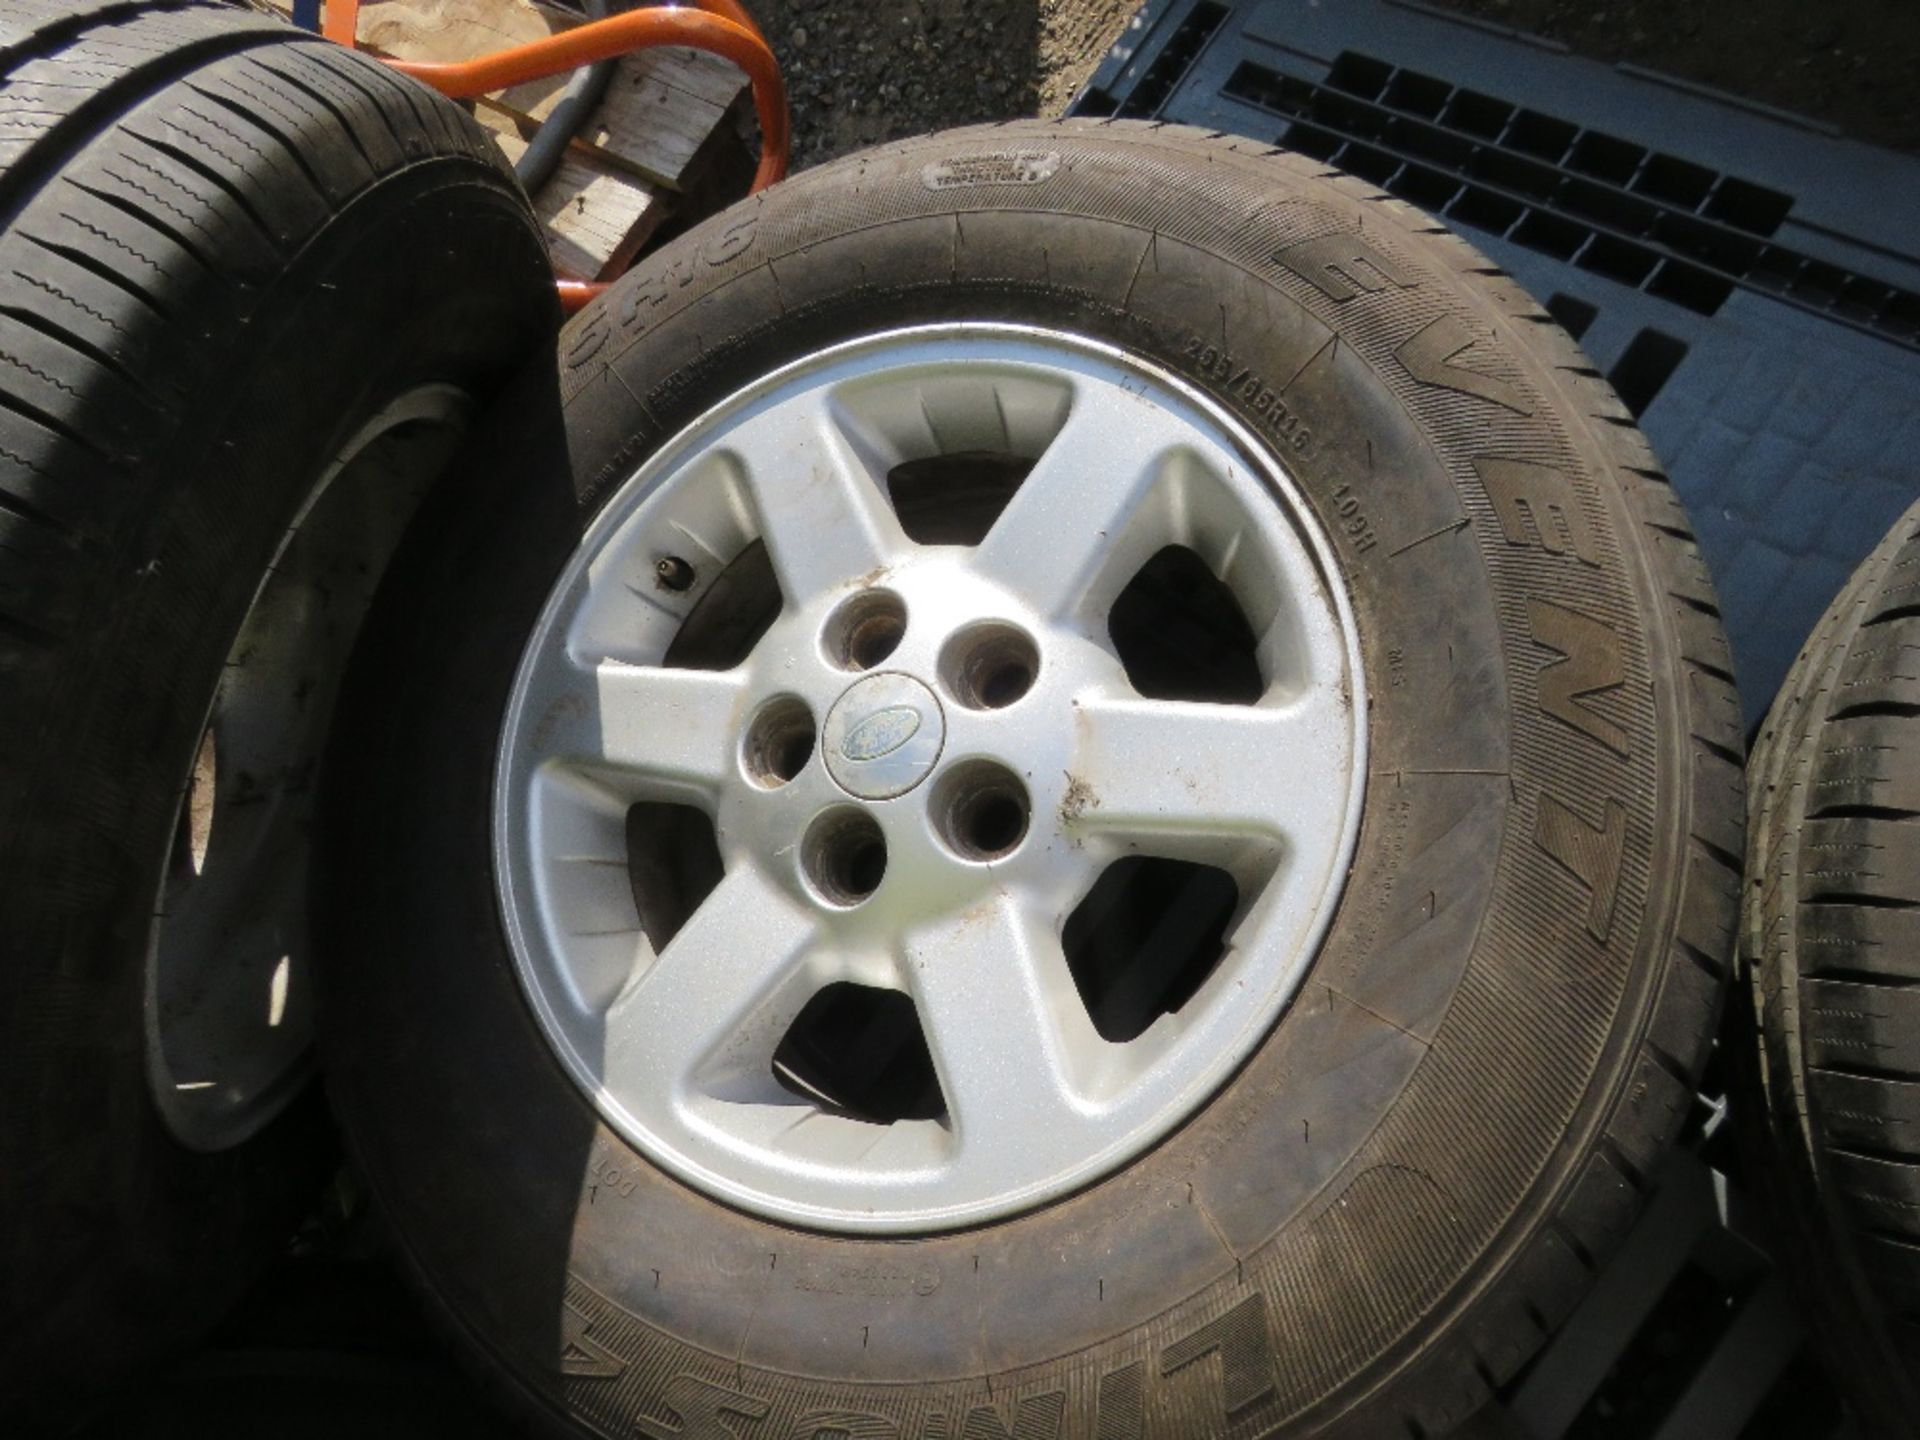 4 X LANDROVER 255-65R16 ALLOY WHEELS AND TYRES PLUS 2 OTHER 16" TYRES. THIS LOT IS SOLD UNDER THE - Image 7 of 7